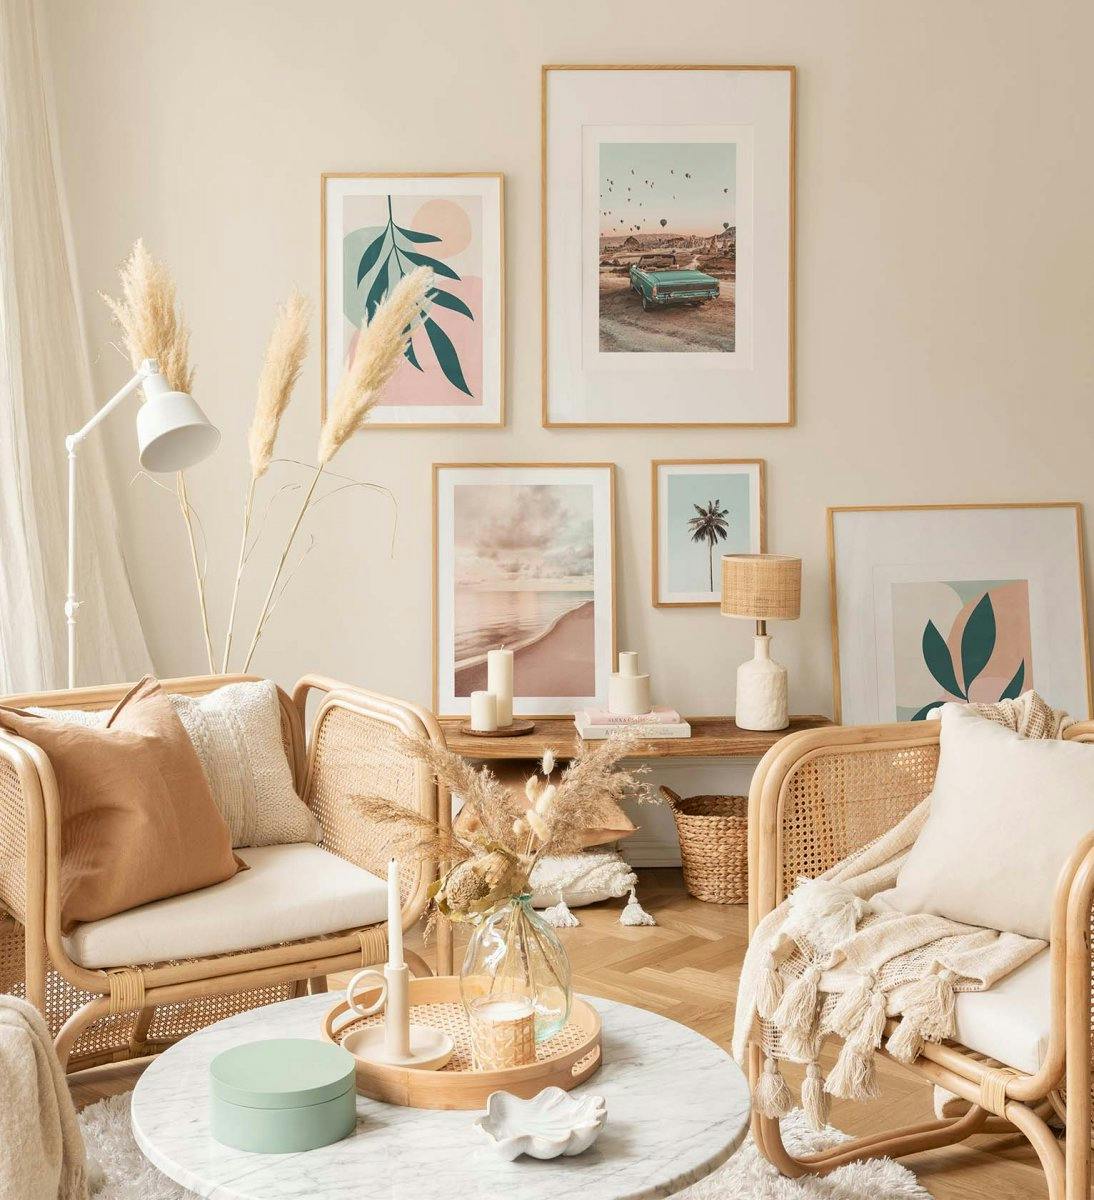 Graphic gallery wall in pastel colors combined with nature photographs for the home office